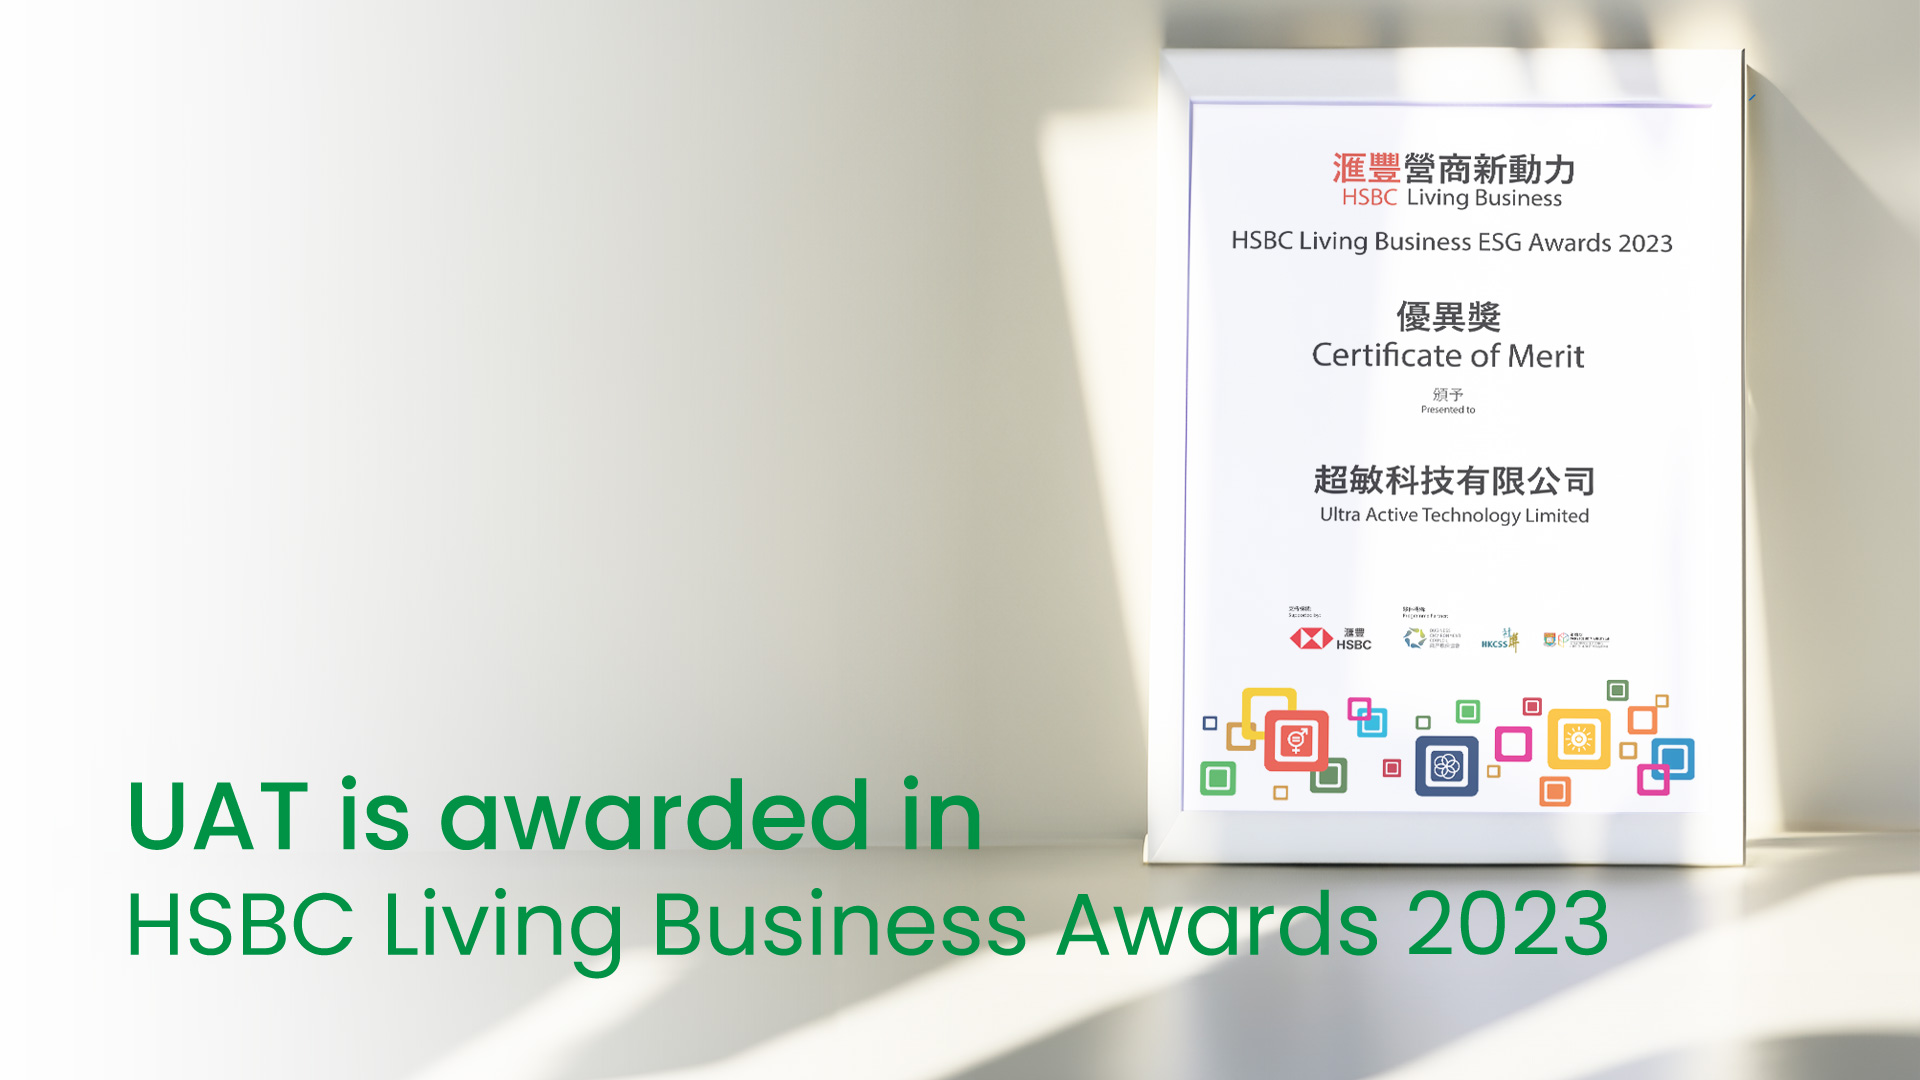 UAT is awarded in HSBC Living Business Awards 2023